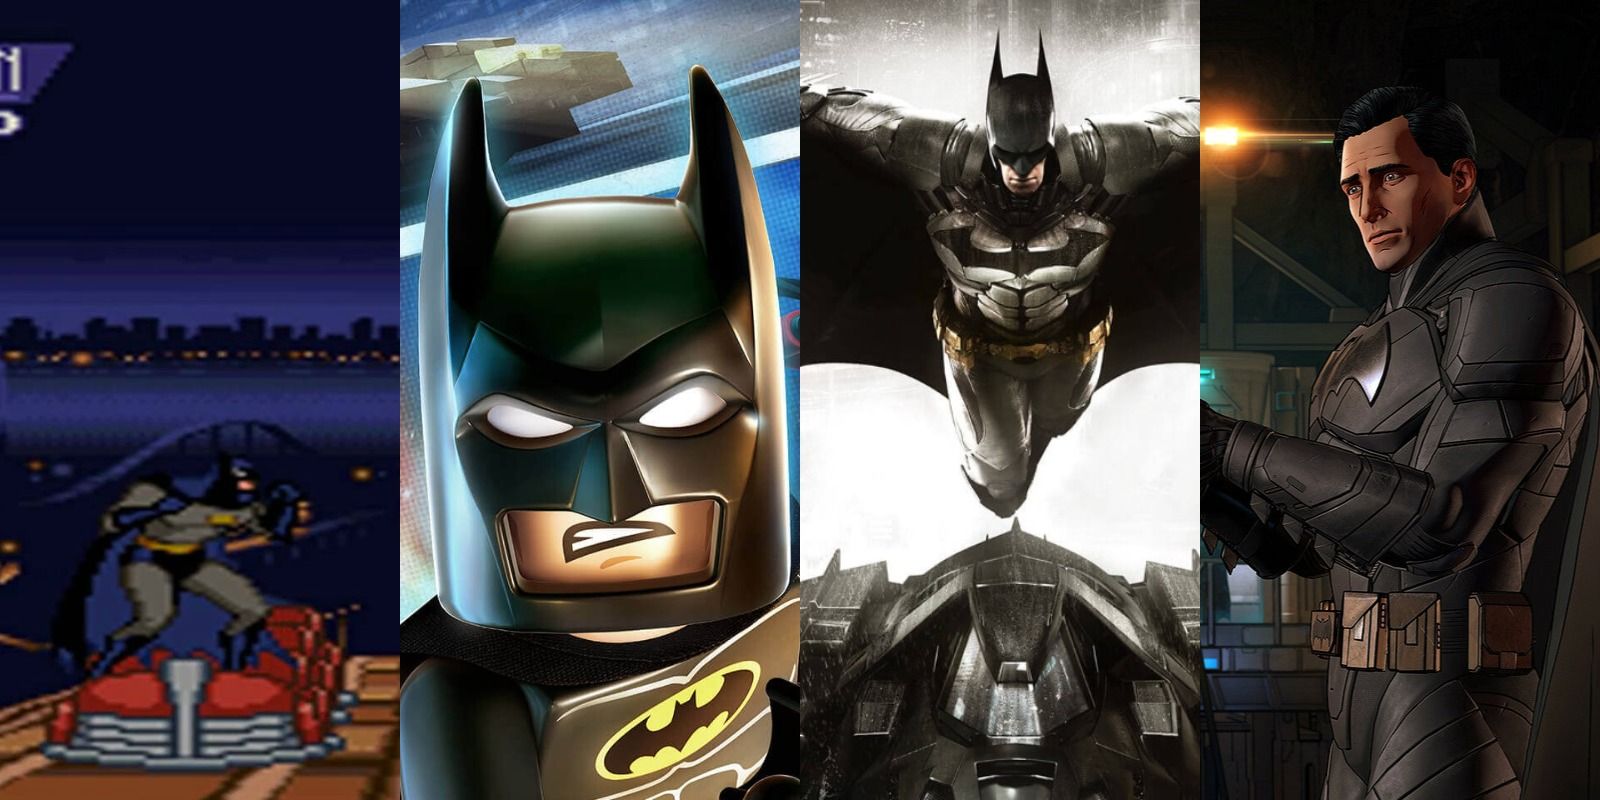 10 Best DC Video Games Of All Time, According To Metacritic - IMDb